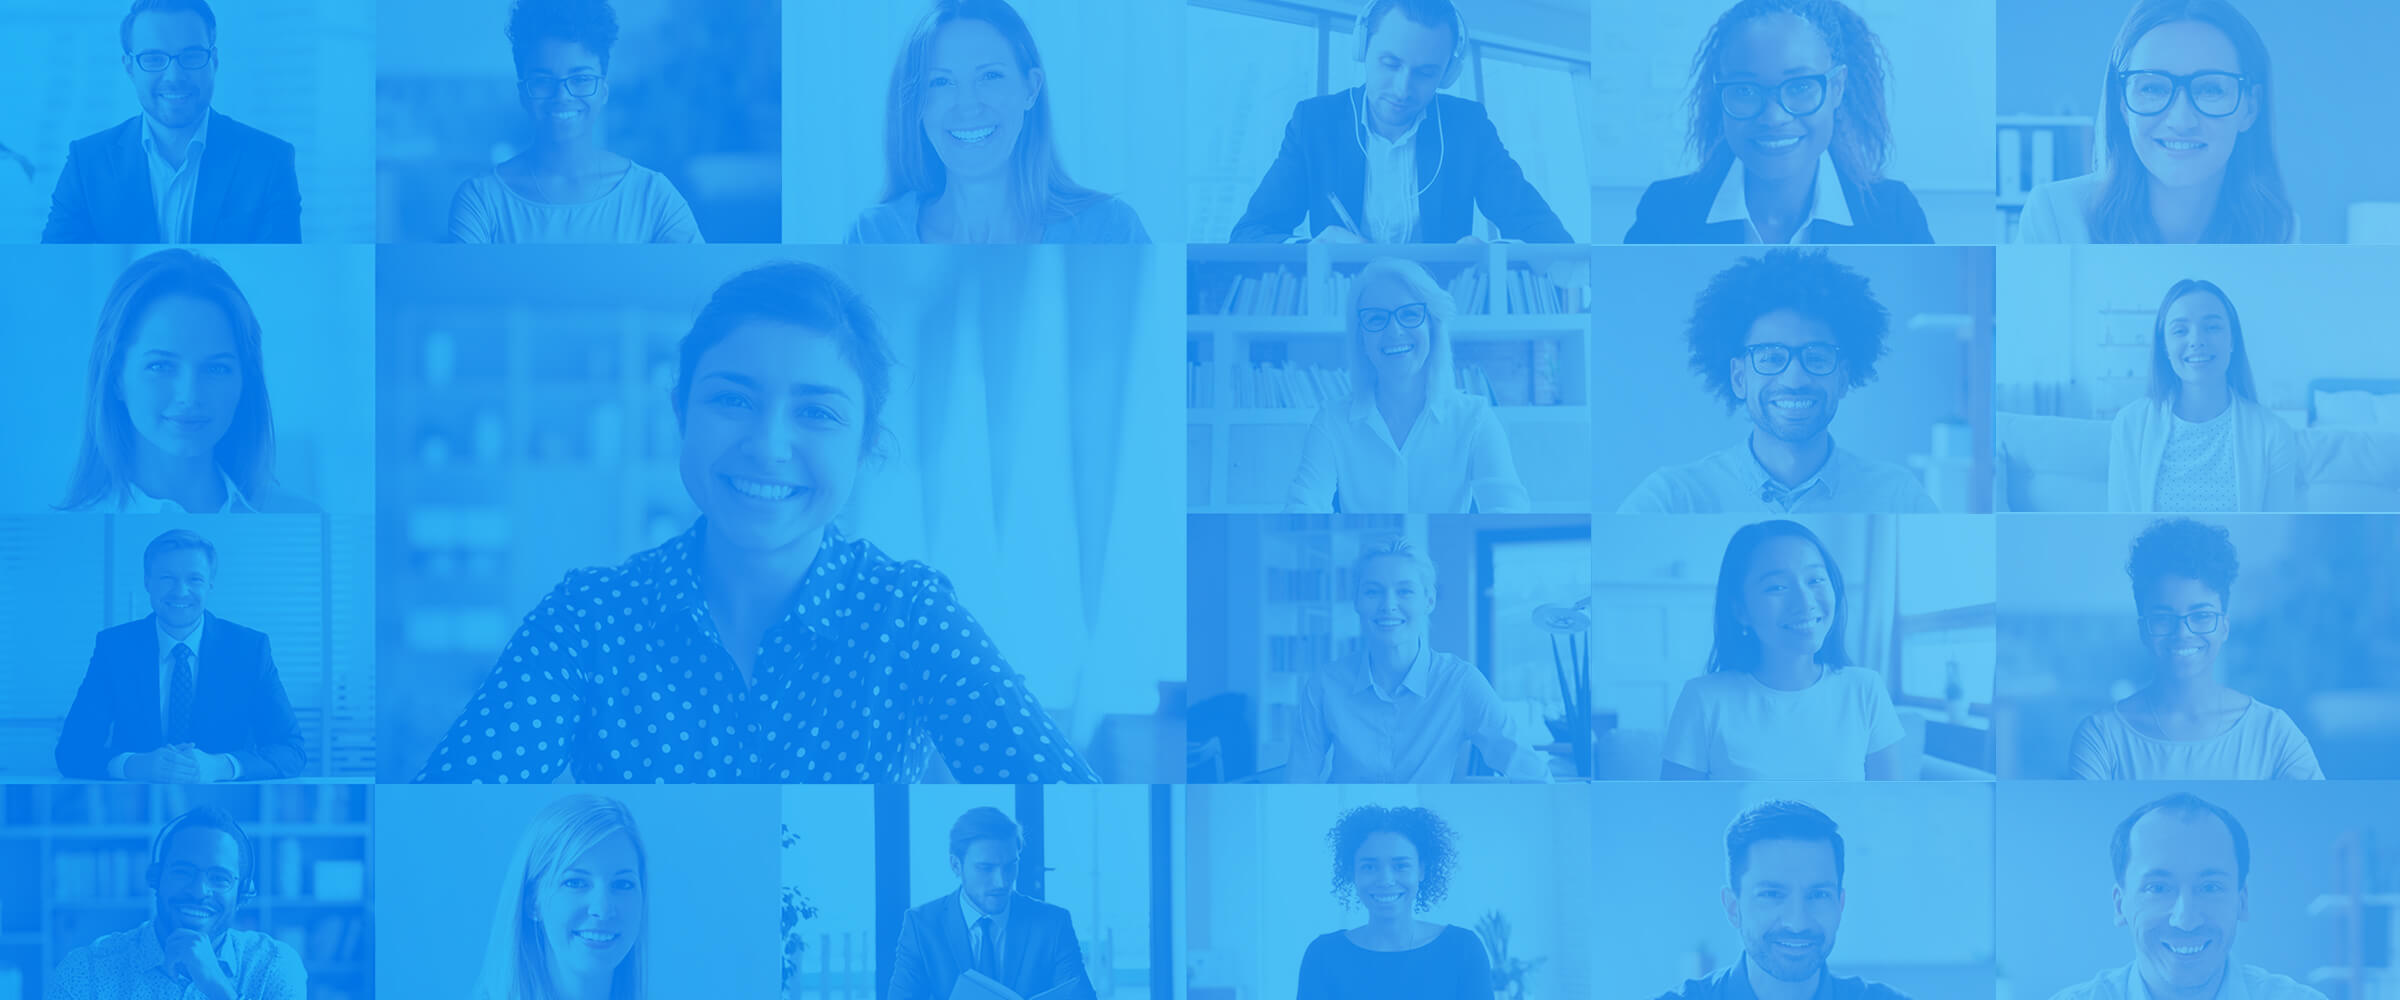 Grid showing stock photos of office employees in individual squares, and total blue overlay